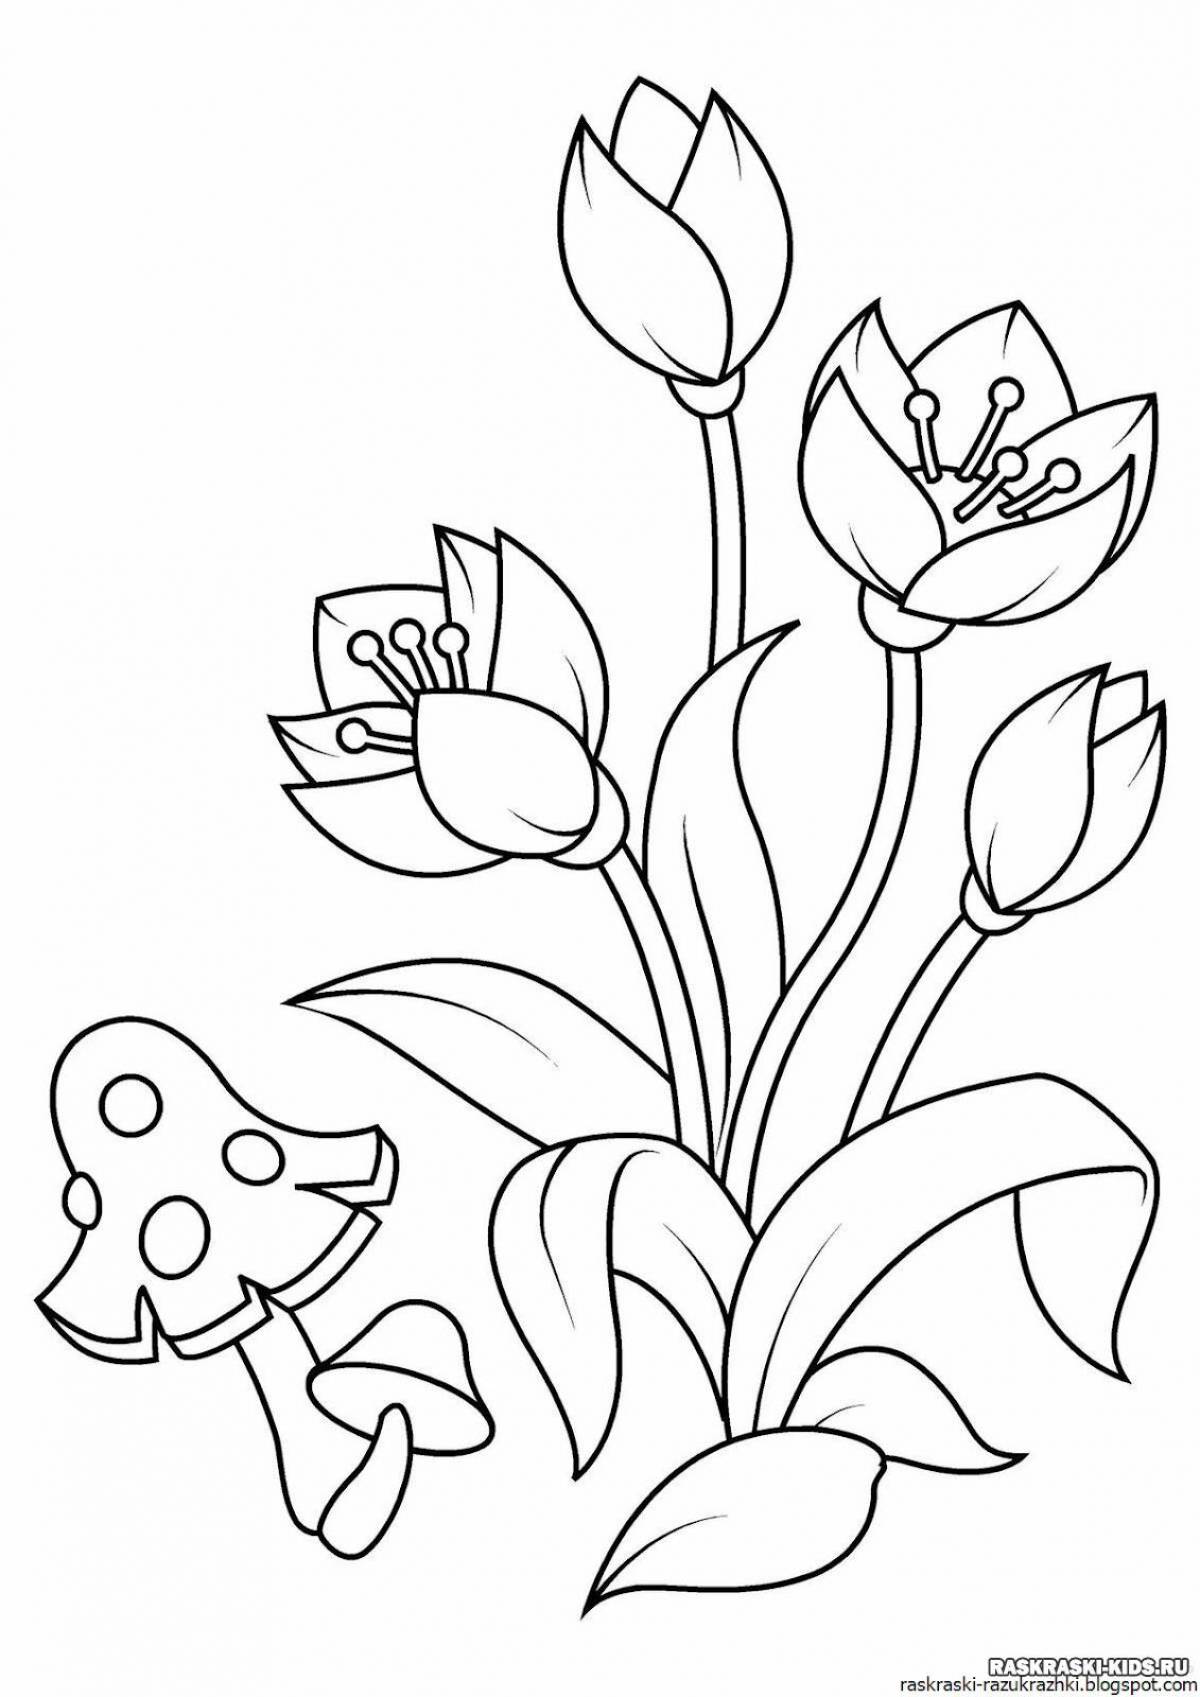 Shining flowers coloring book